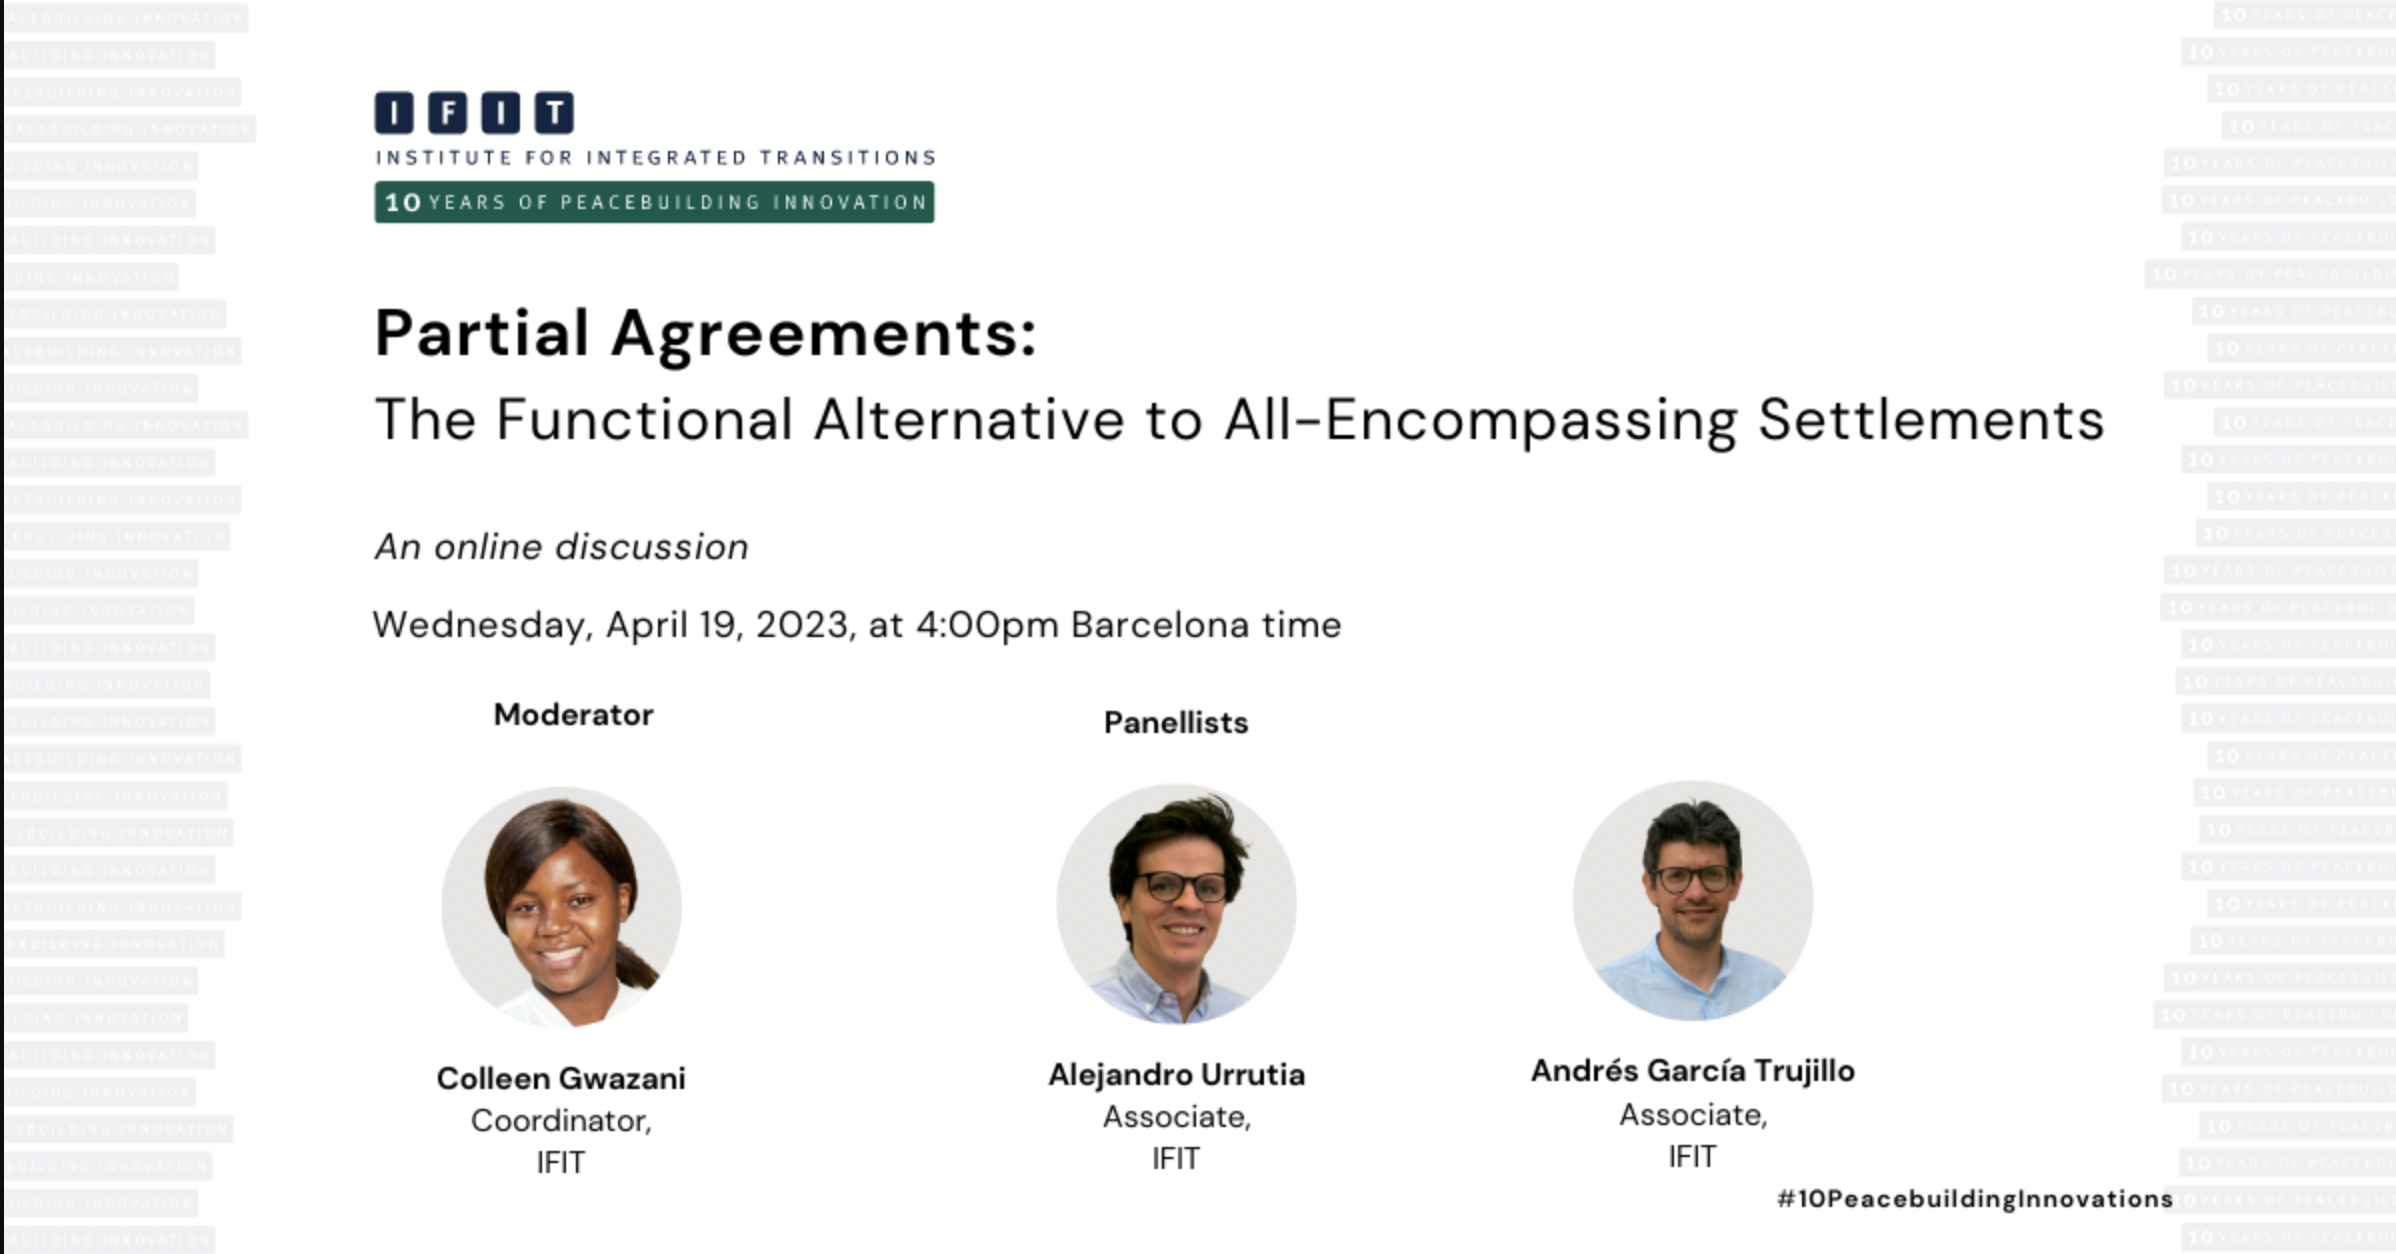 Partial Agreements: The Functional Alternative to All-Encompassing Settlements